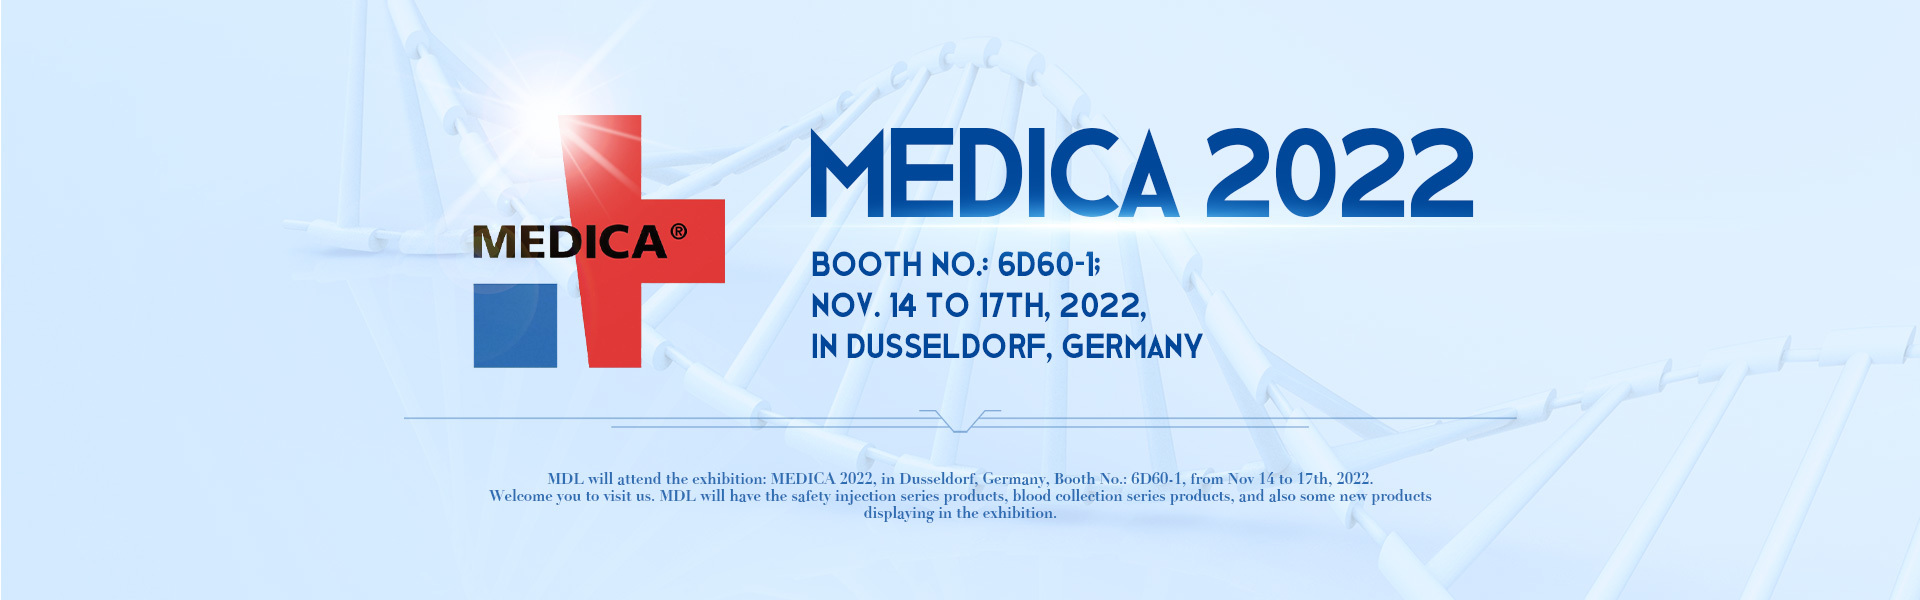 MEDICA 2022， Booth No.: 6D60-1; Nov. 14 to 17th, 2022, in Dusseldorf, Germany